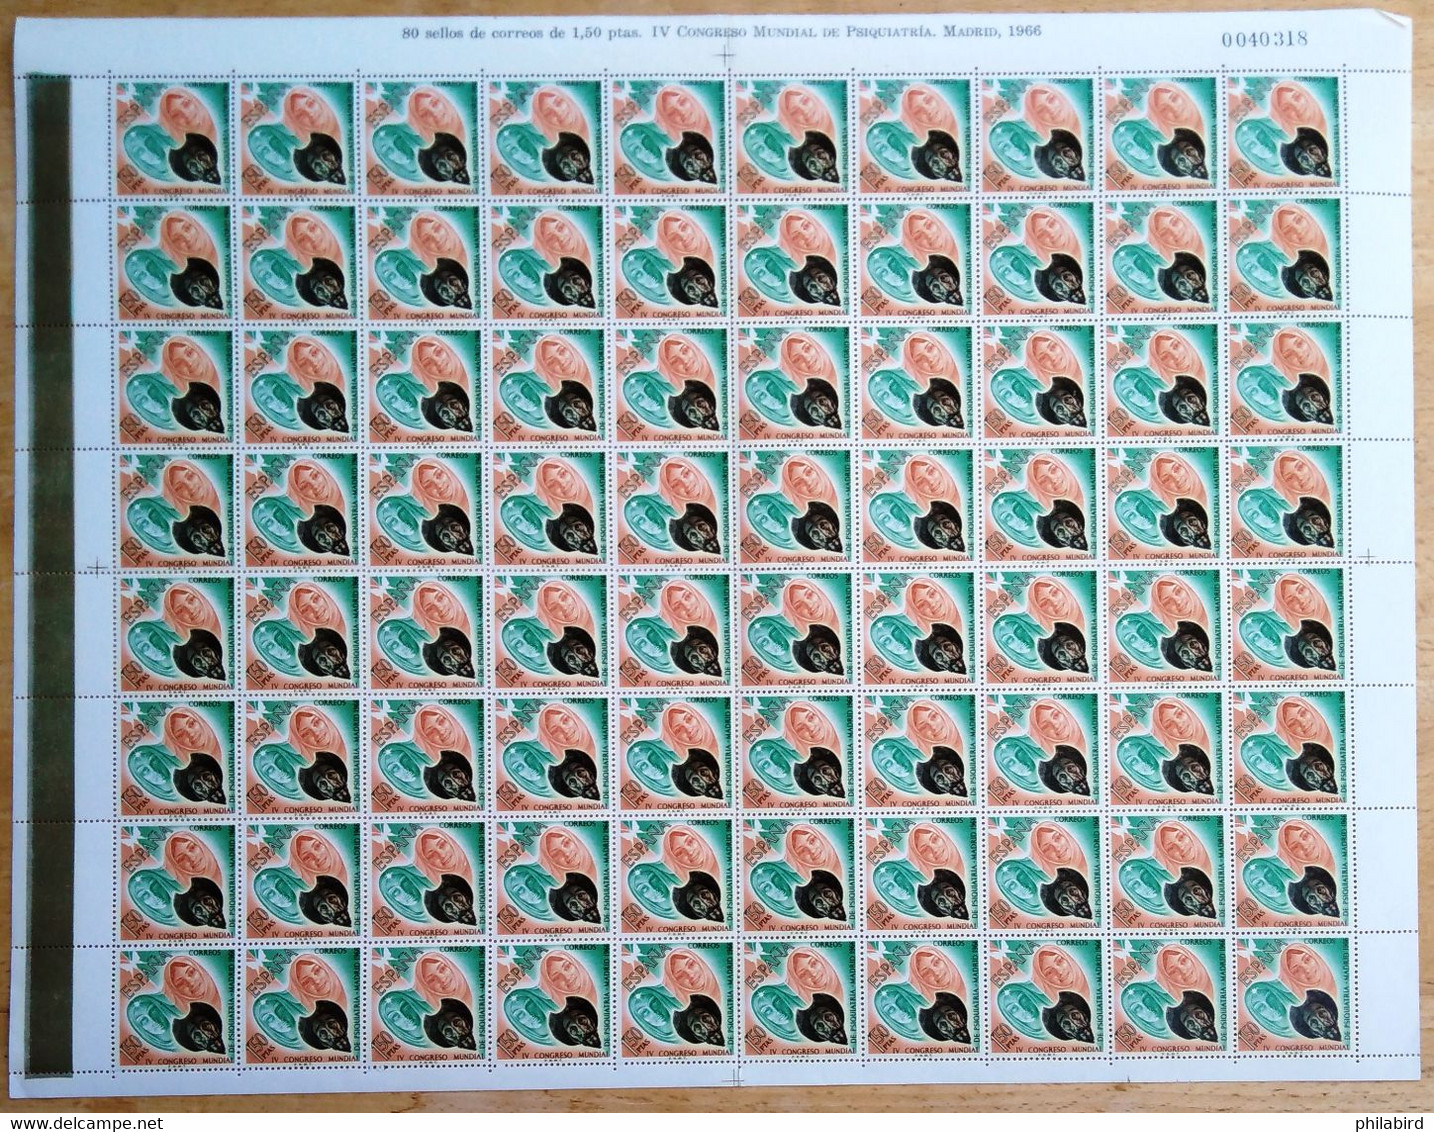 ESPAGNE                      N° 1401       Feuille Complète 80 Timbres                      NEUF** - Fogli Completi